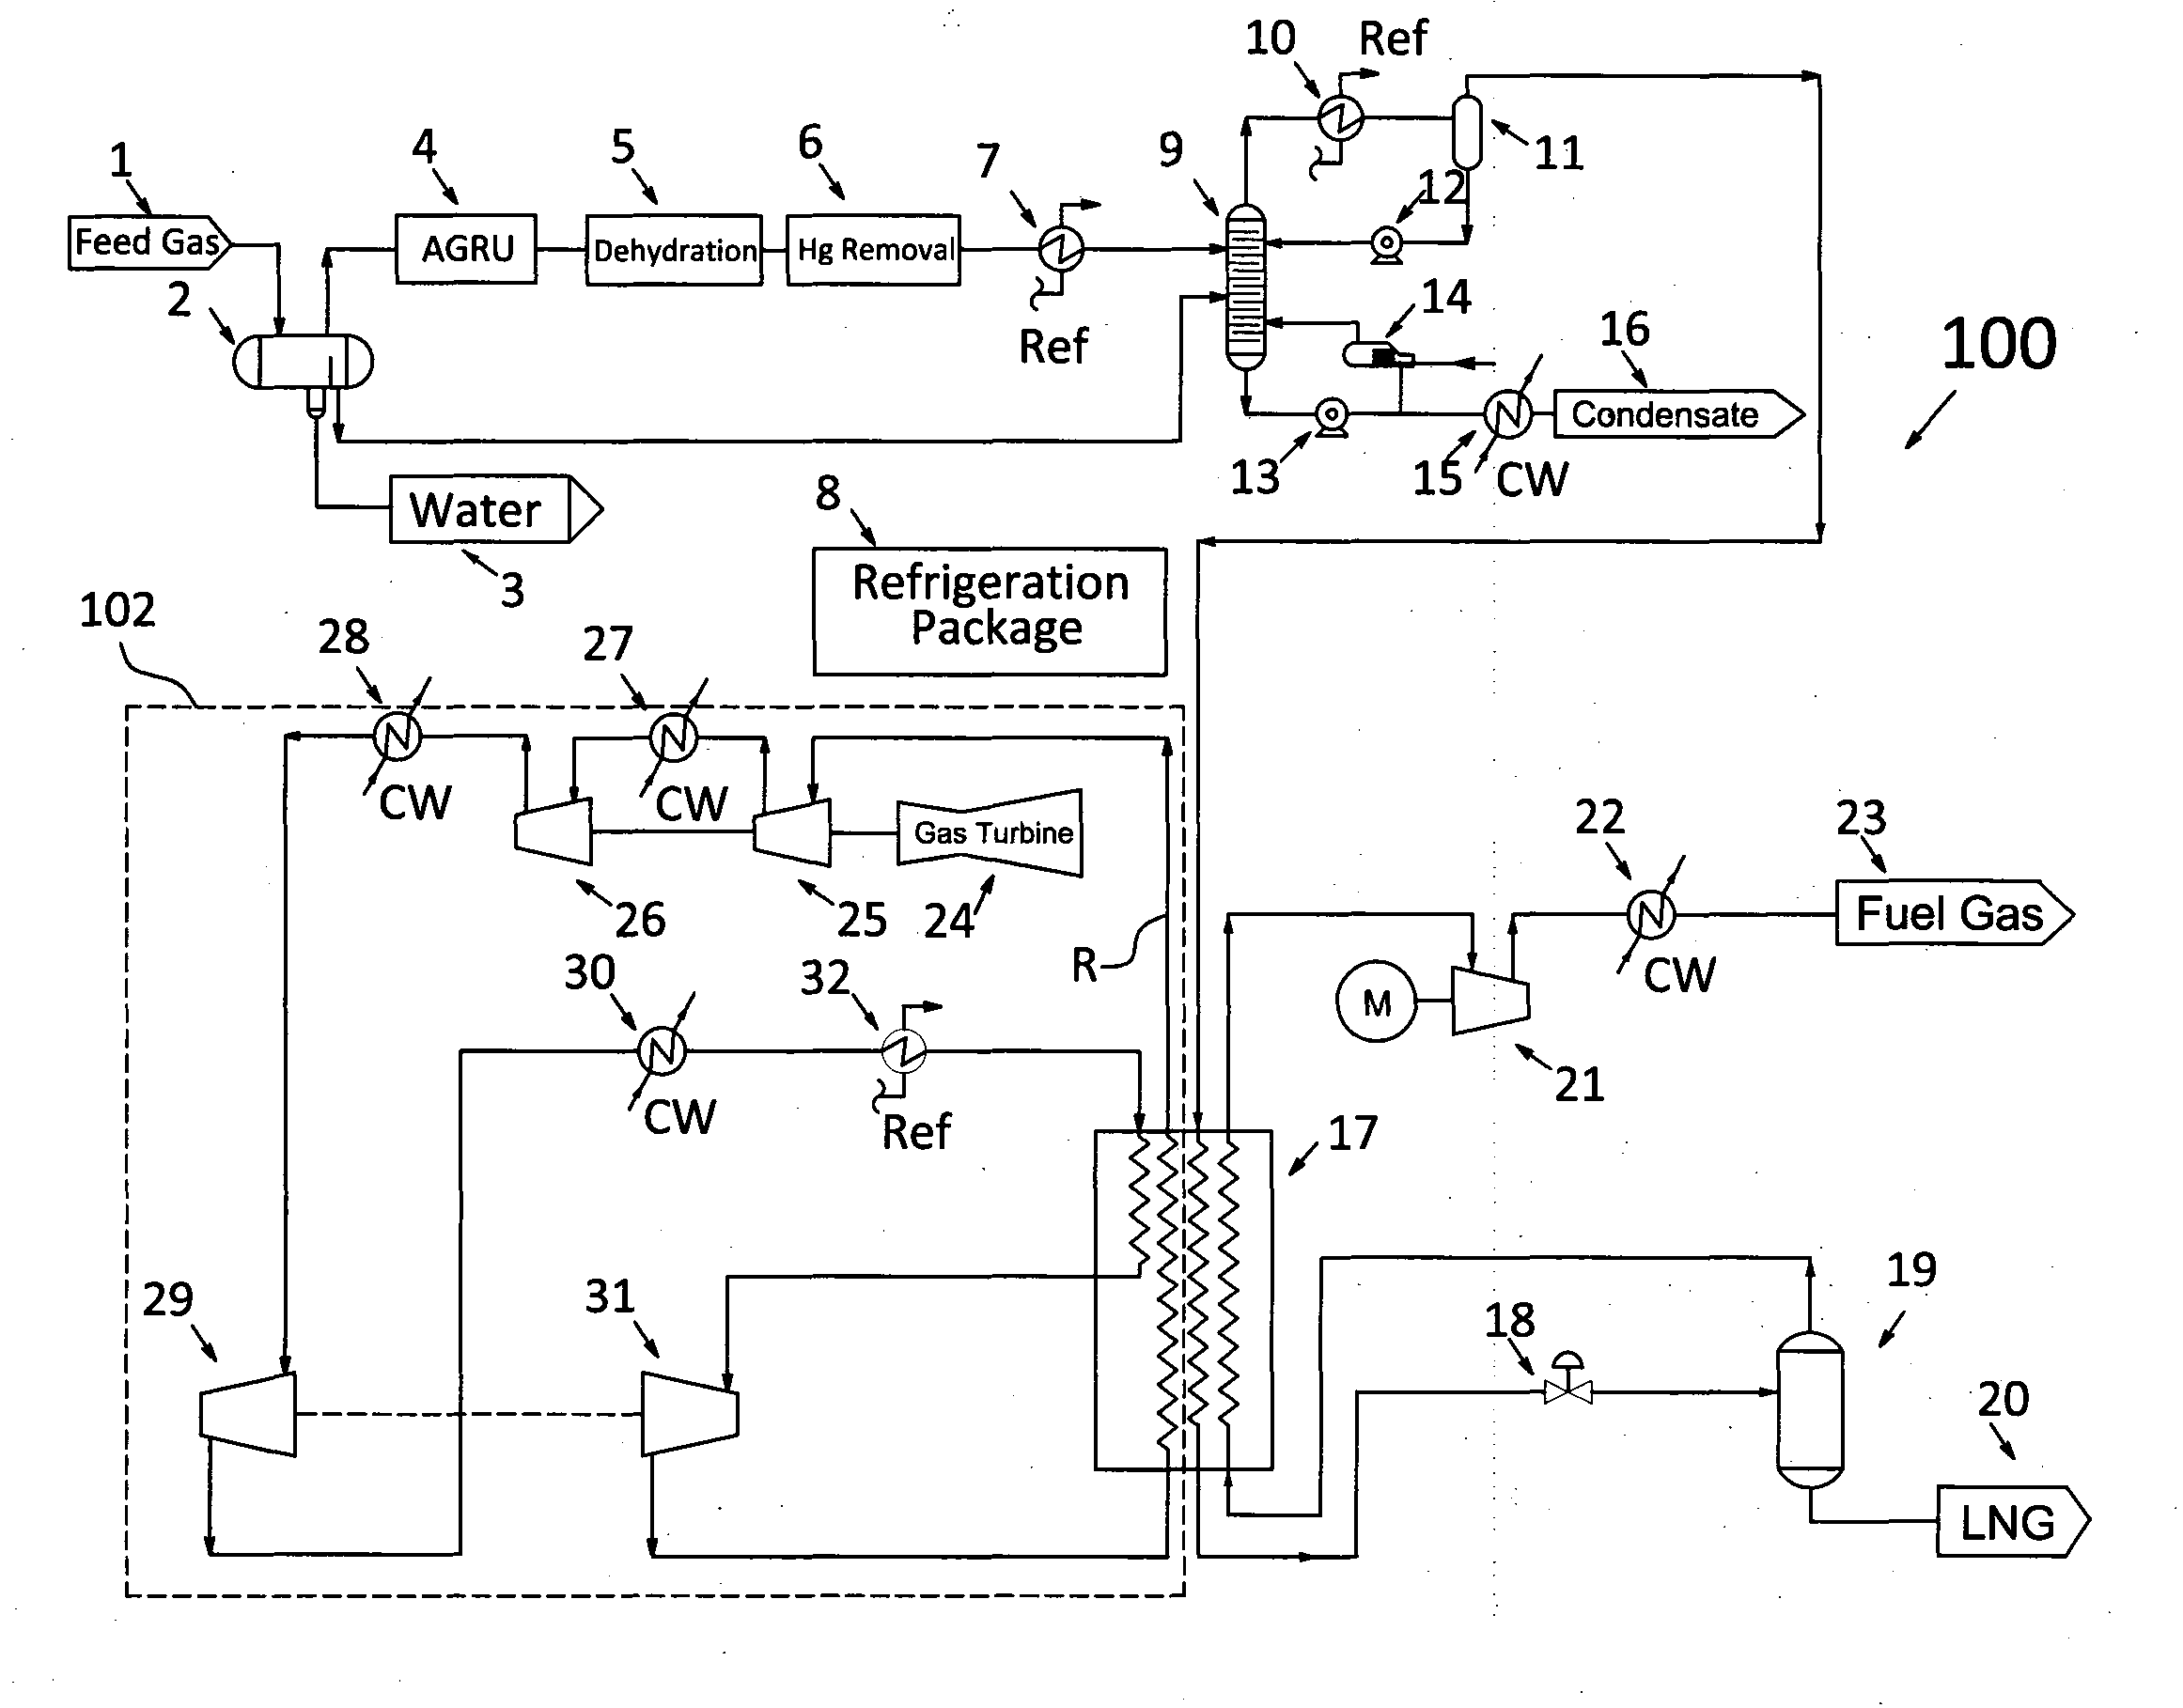 System and process for natural gas liquefaction